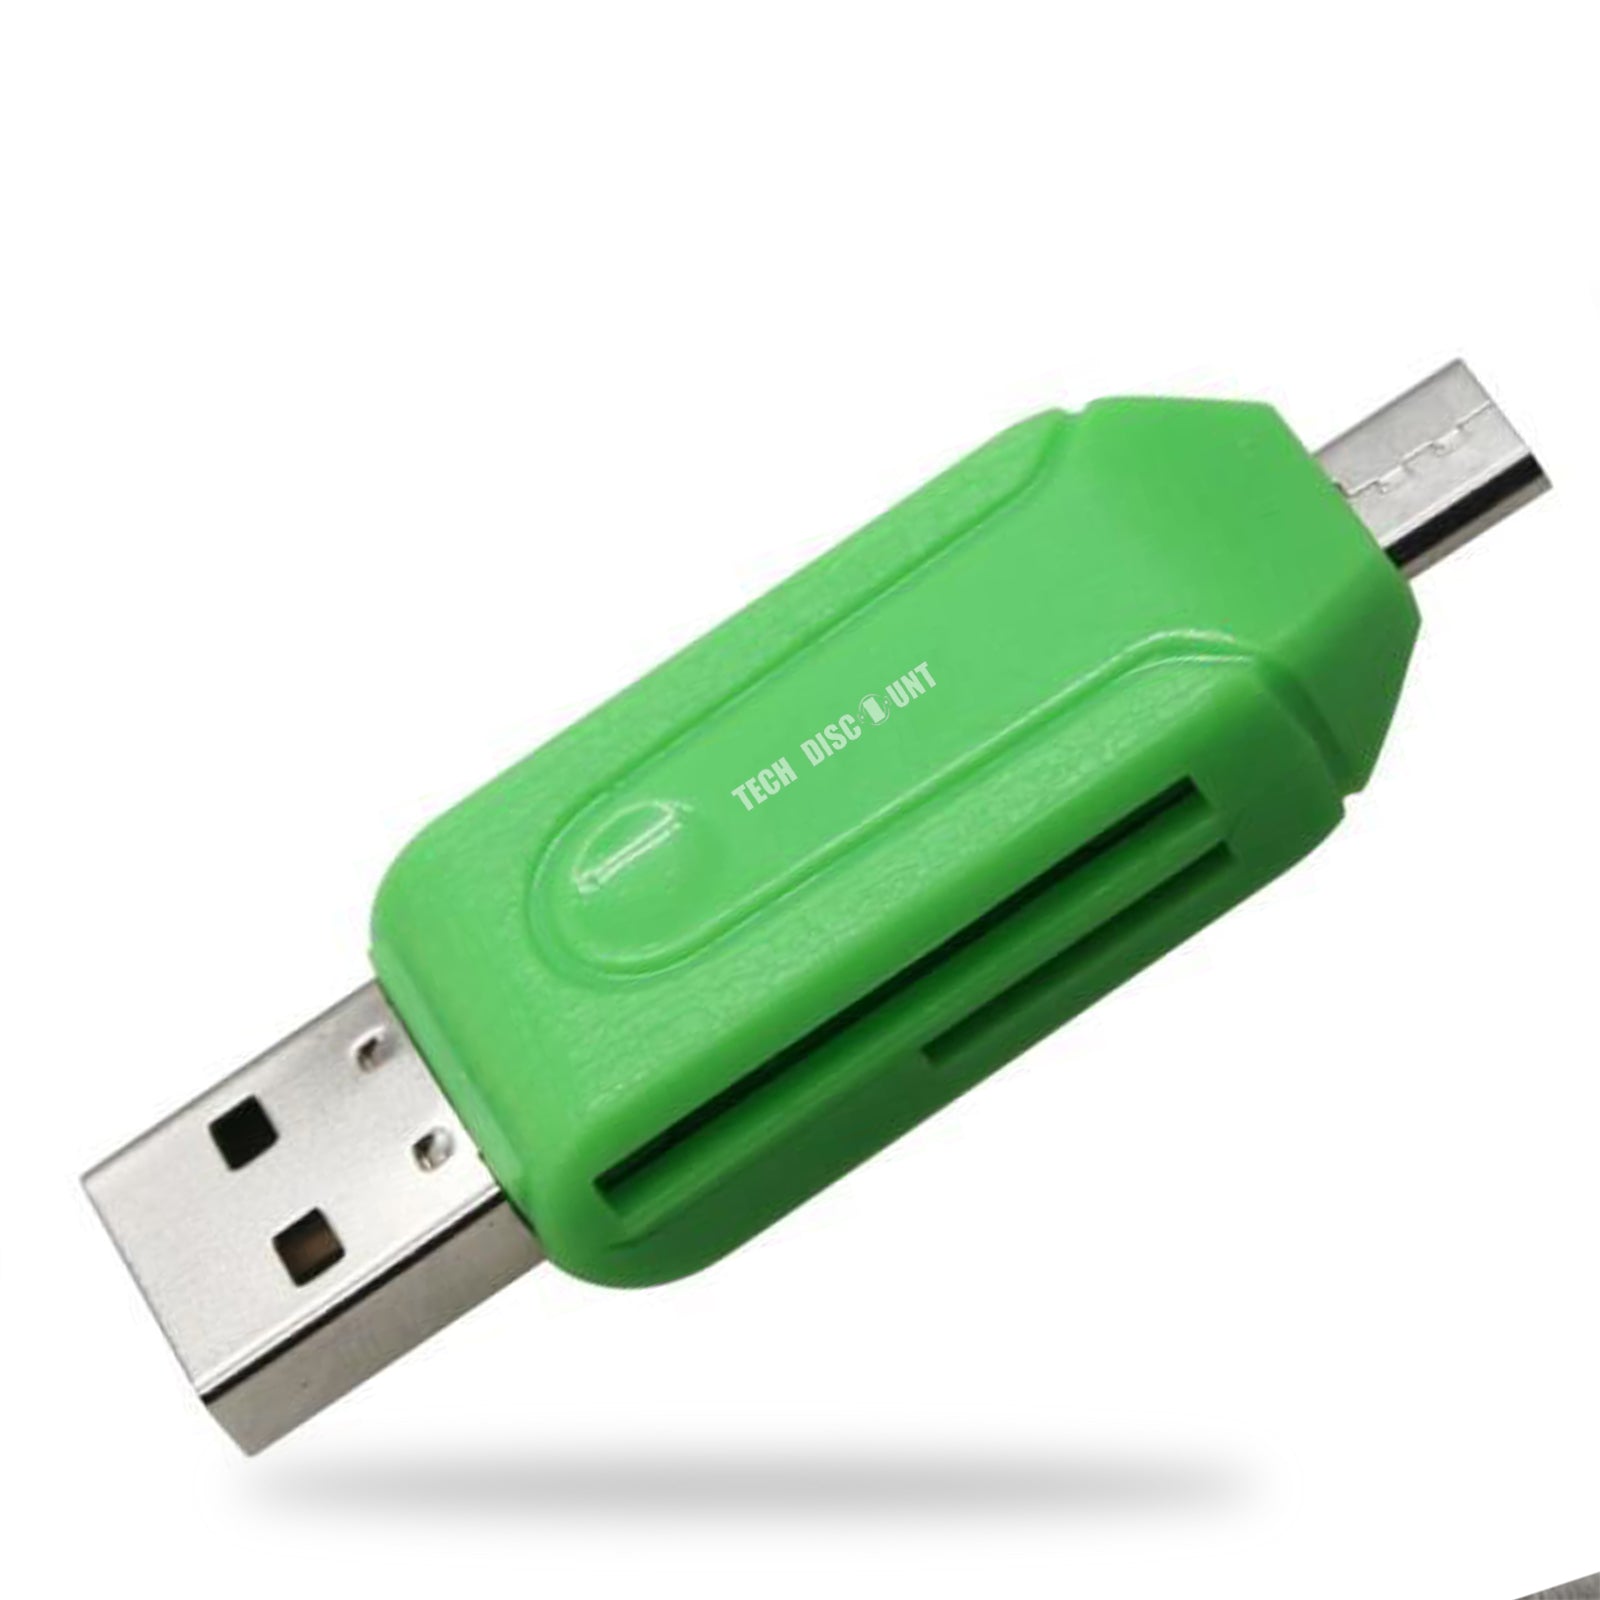 CLE USB SUPPORT MICRO SD